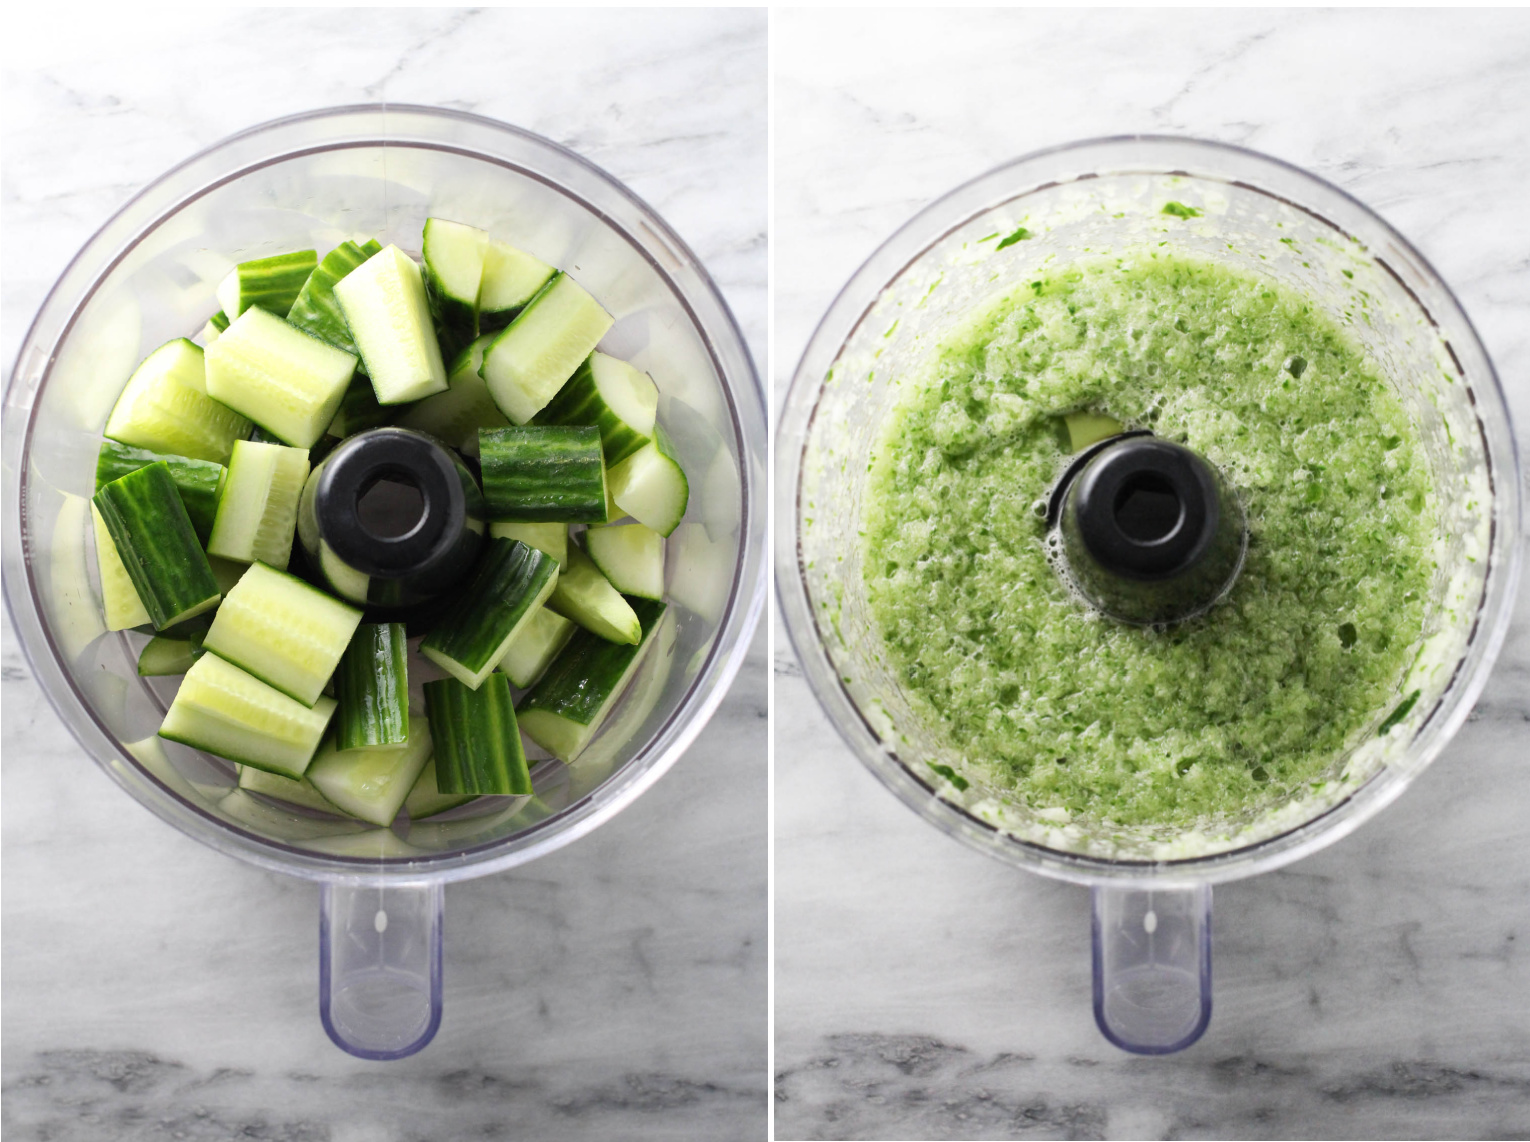 Two images side by side. On the left image, cucumber chuncks in a food processor. On the right image, pureed cucumbers in a food processor.